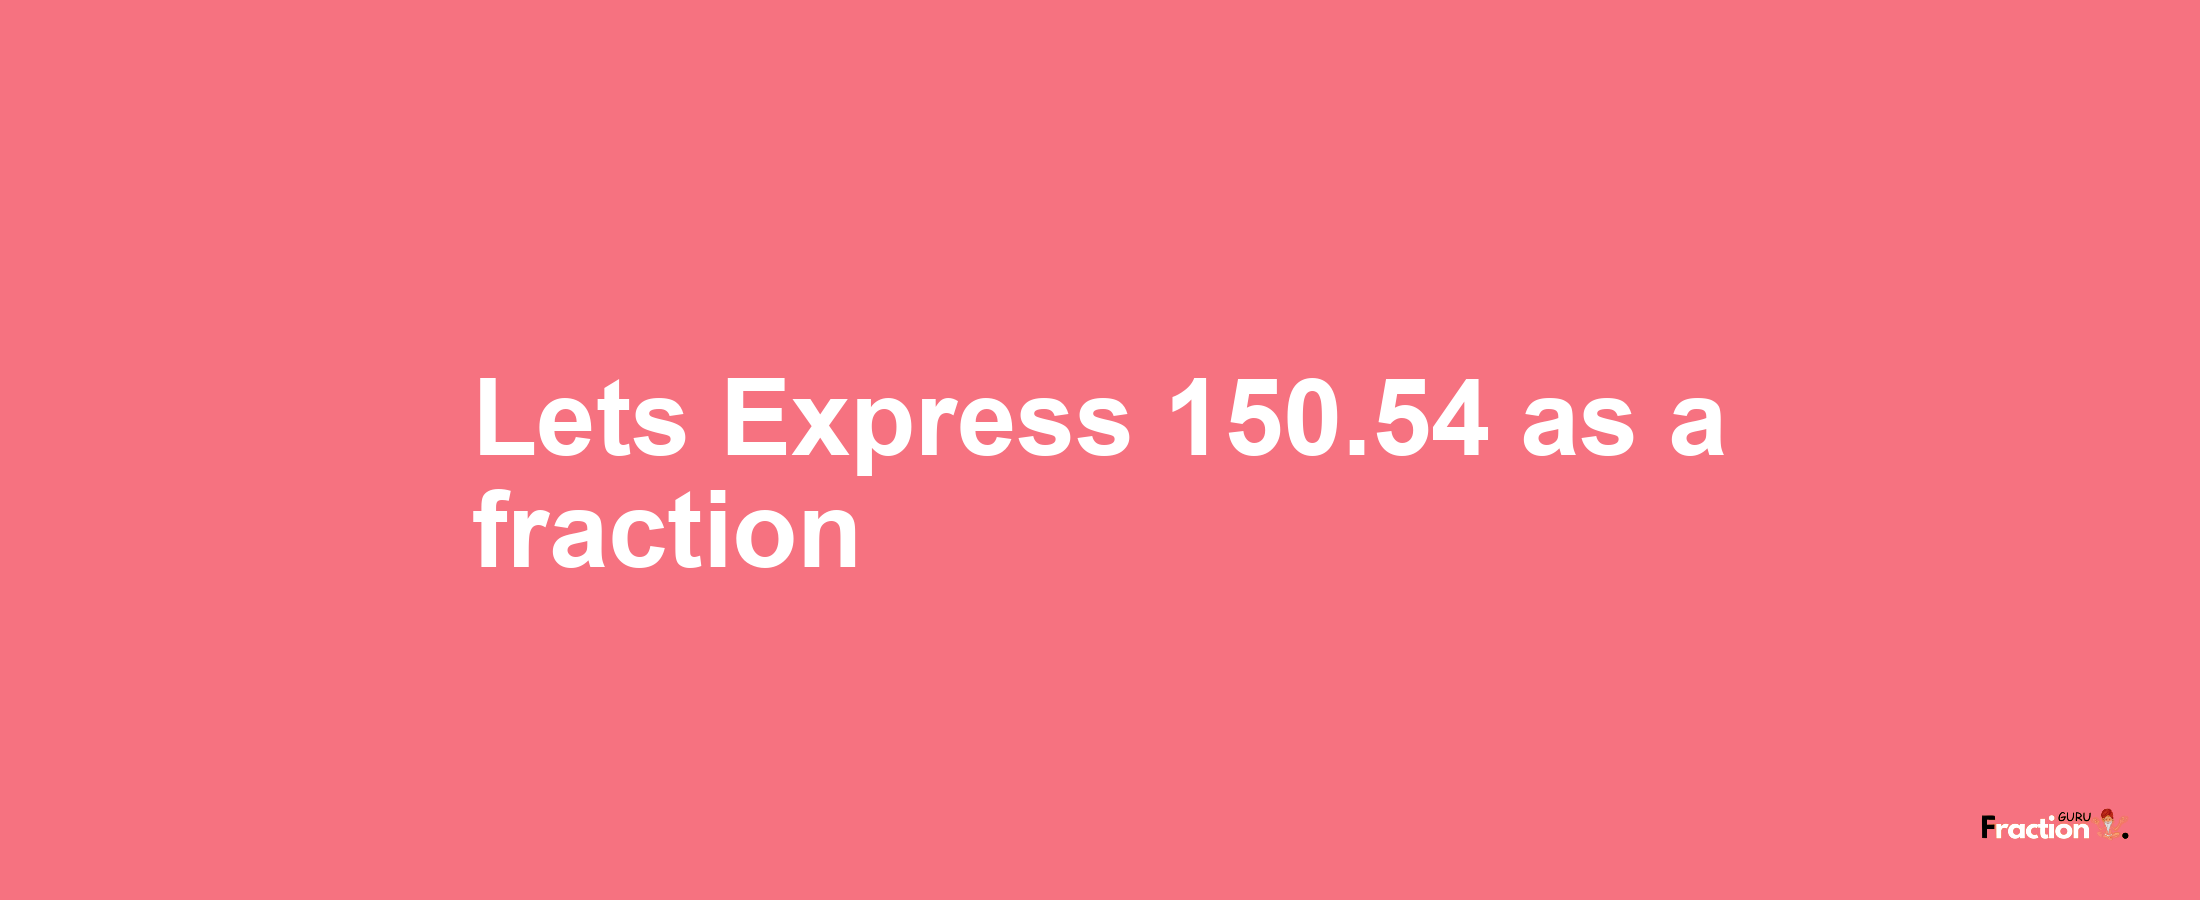 Lets Express 150.54 as afraction